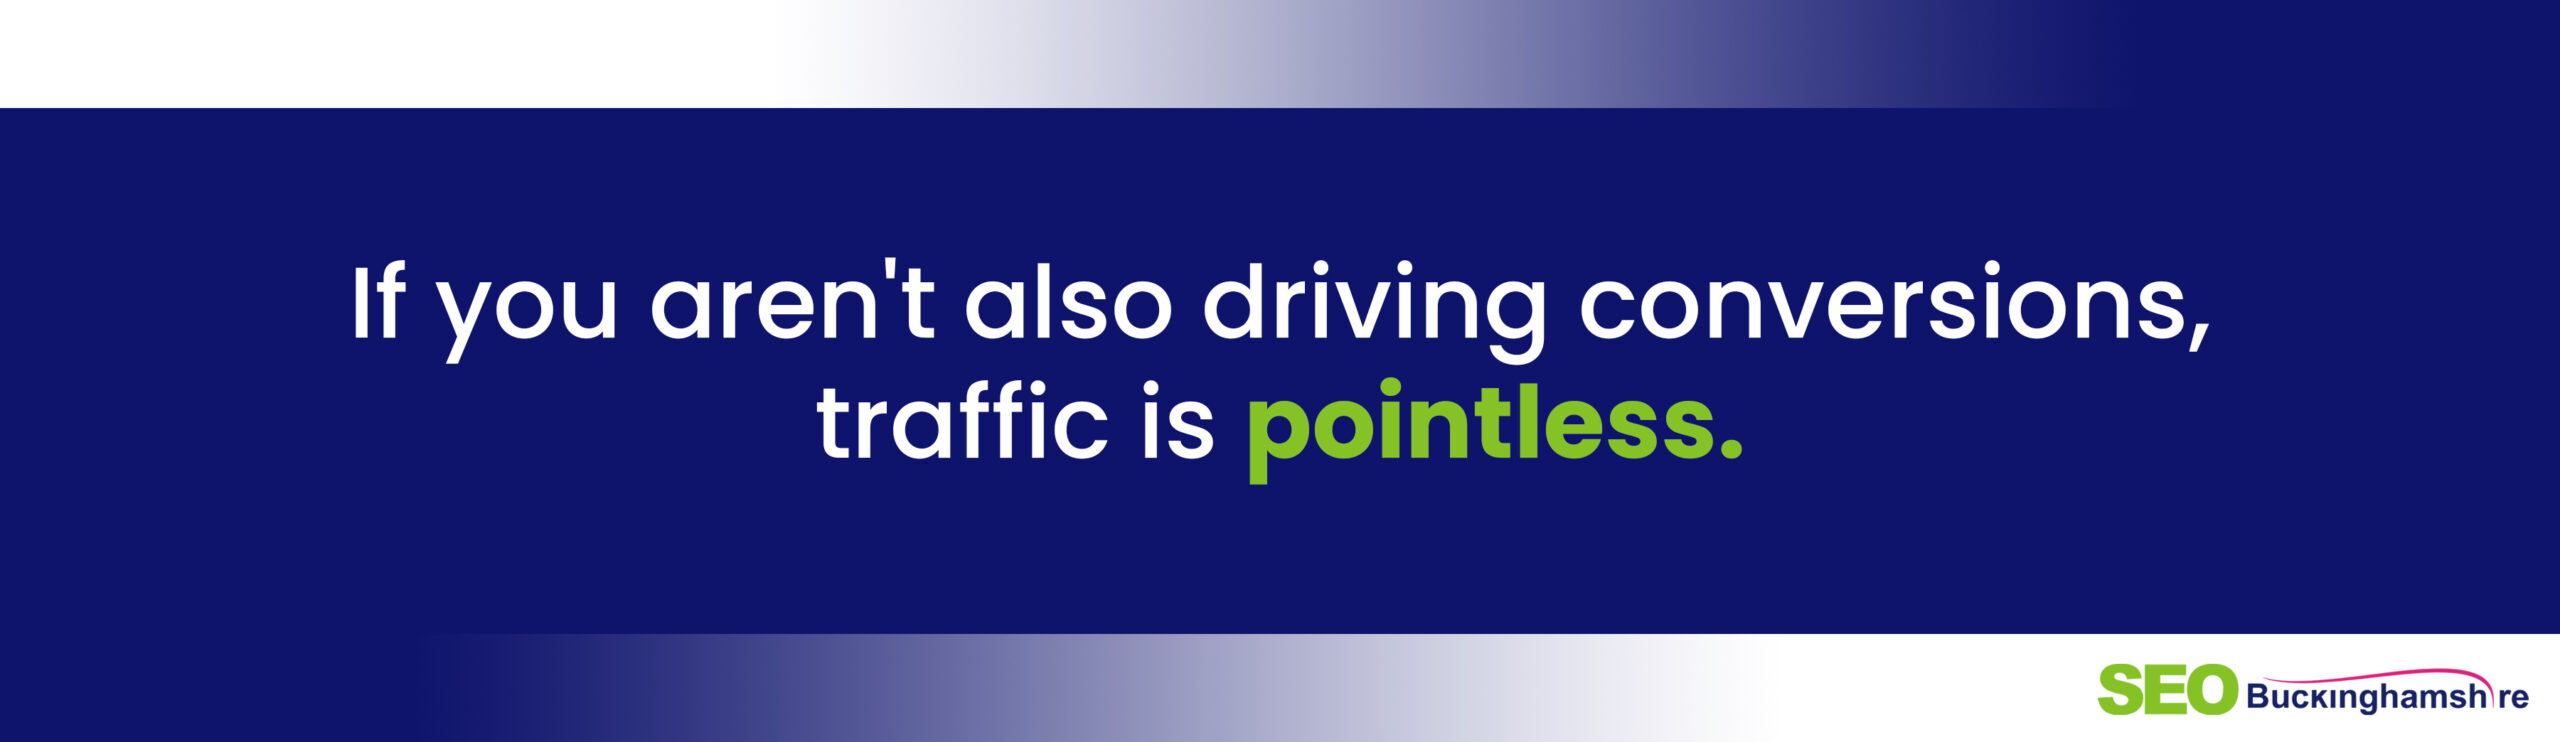 If you aren’t also driving conversions, traffic is pointless.